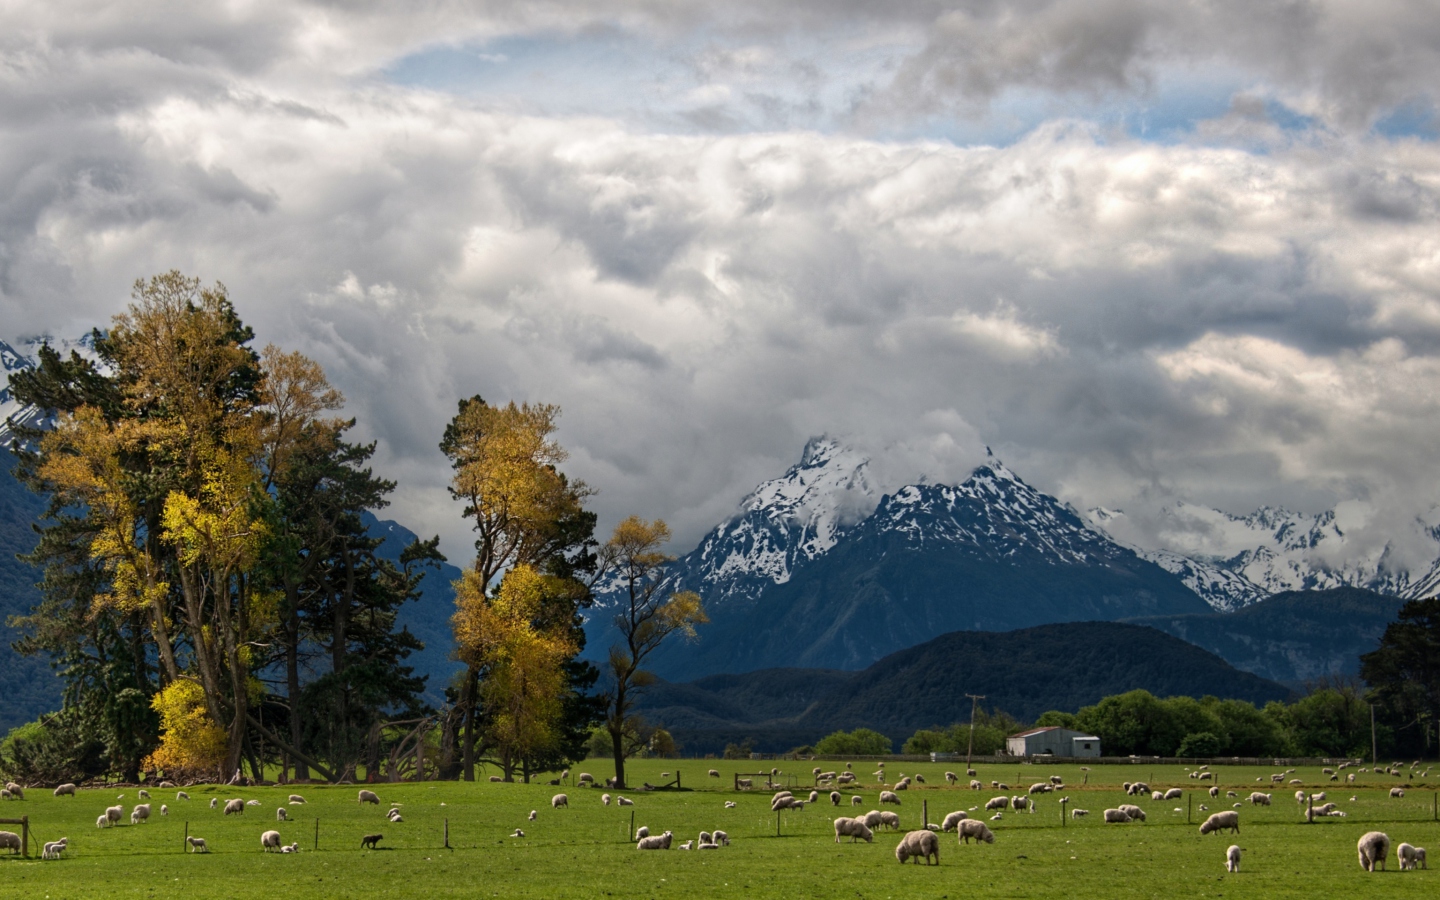 Sheeps On Green Field And Mountain View wallpaper 1440x900